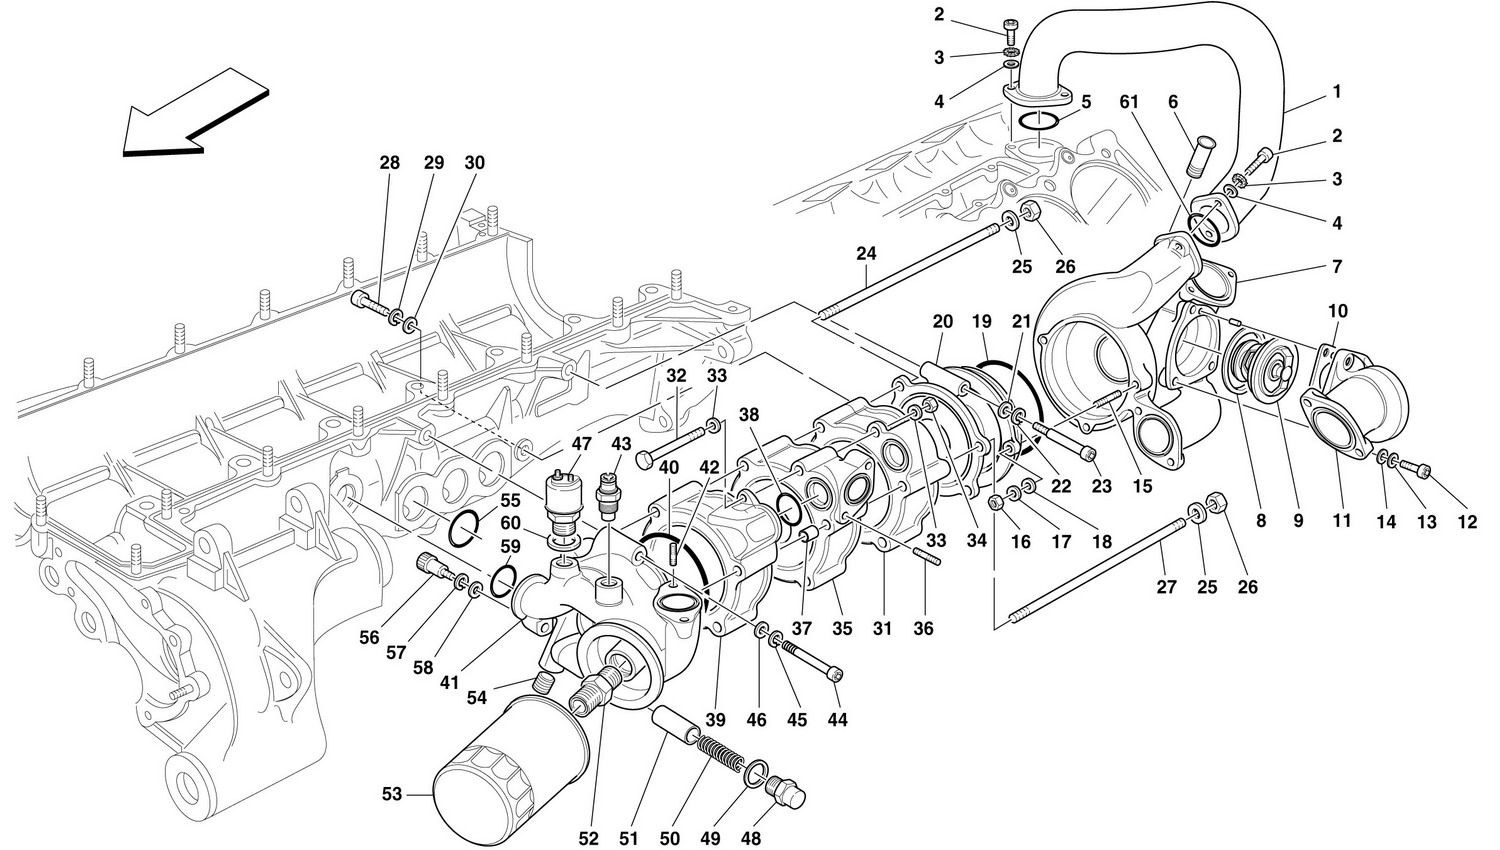 Schematic: Oil/Water Pump - Body And Accessories